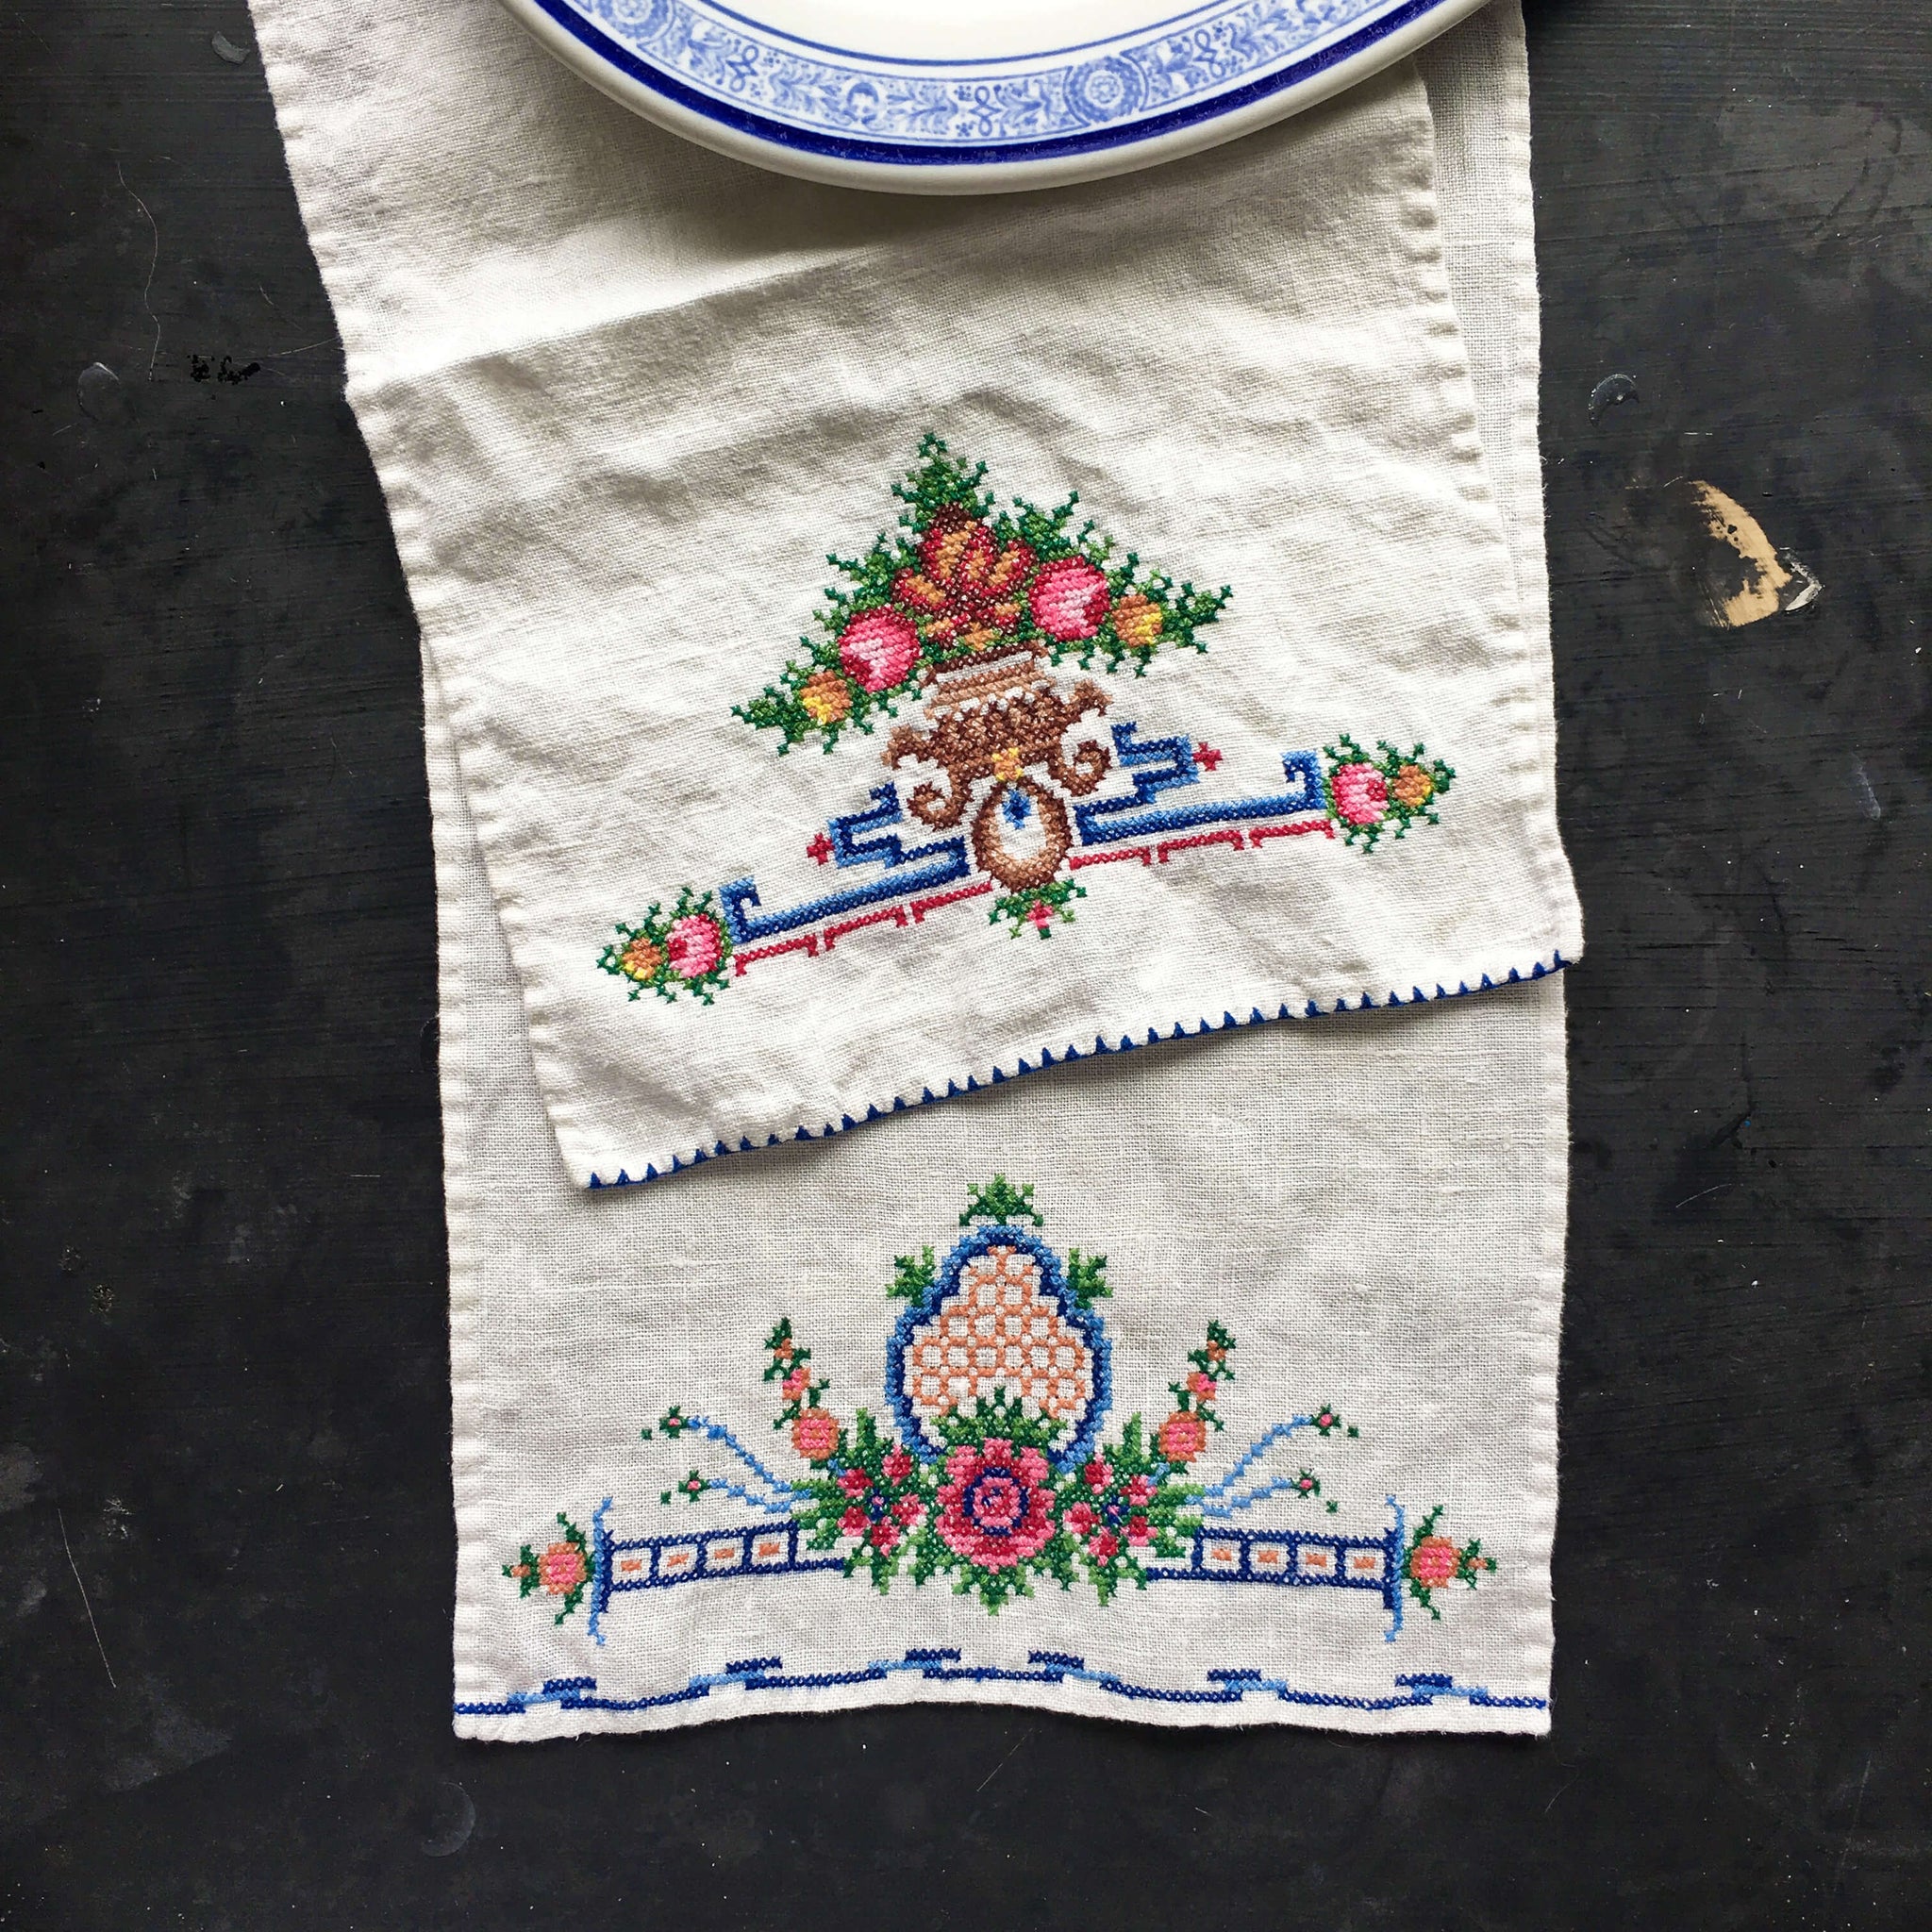 Vintage Cross Stitch Embroidery Kitchen Towels - Set of Two - Colorful Florals